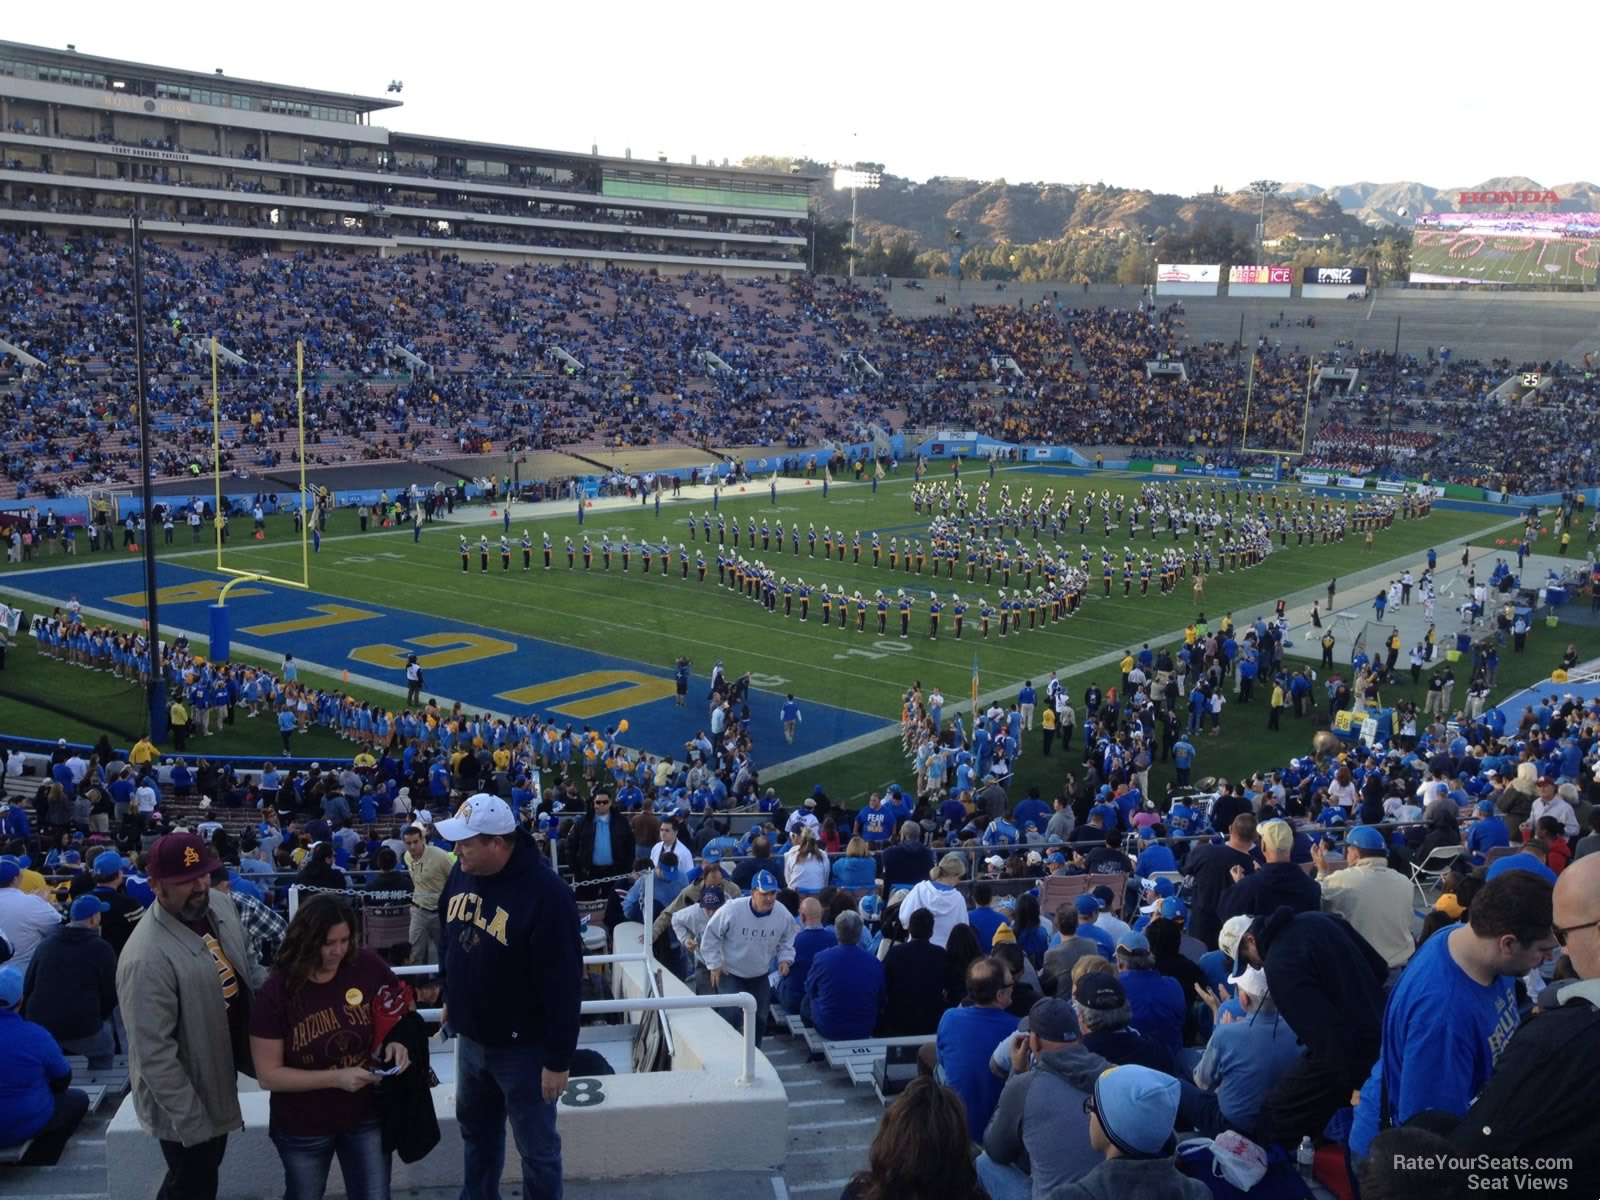 section 28, row 51 seat view  for football - rose bowl stadium